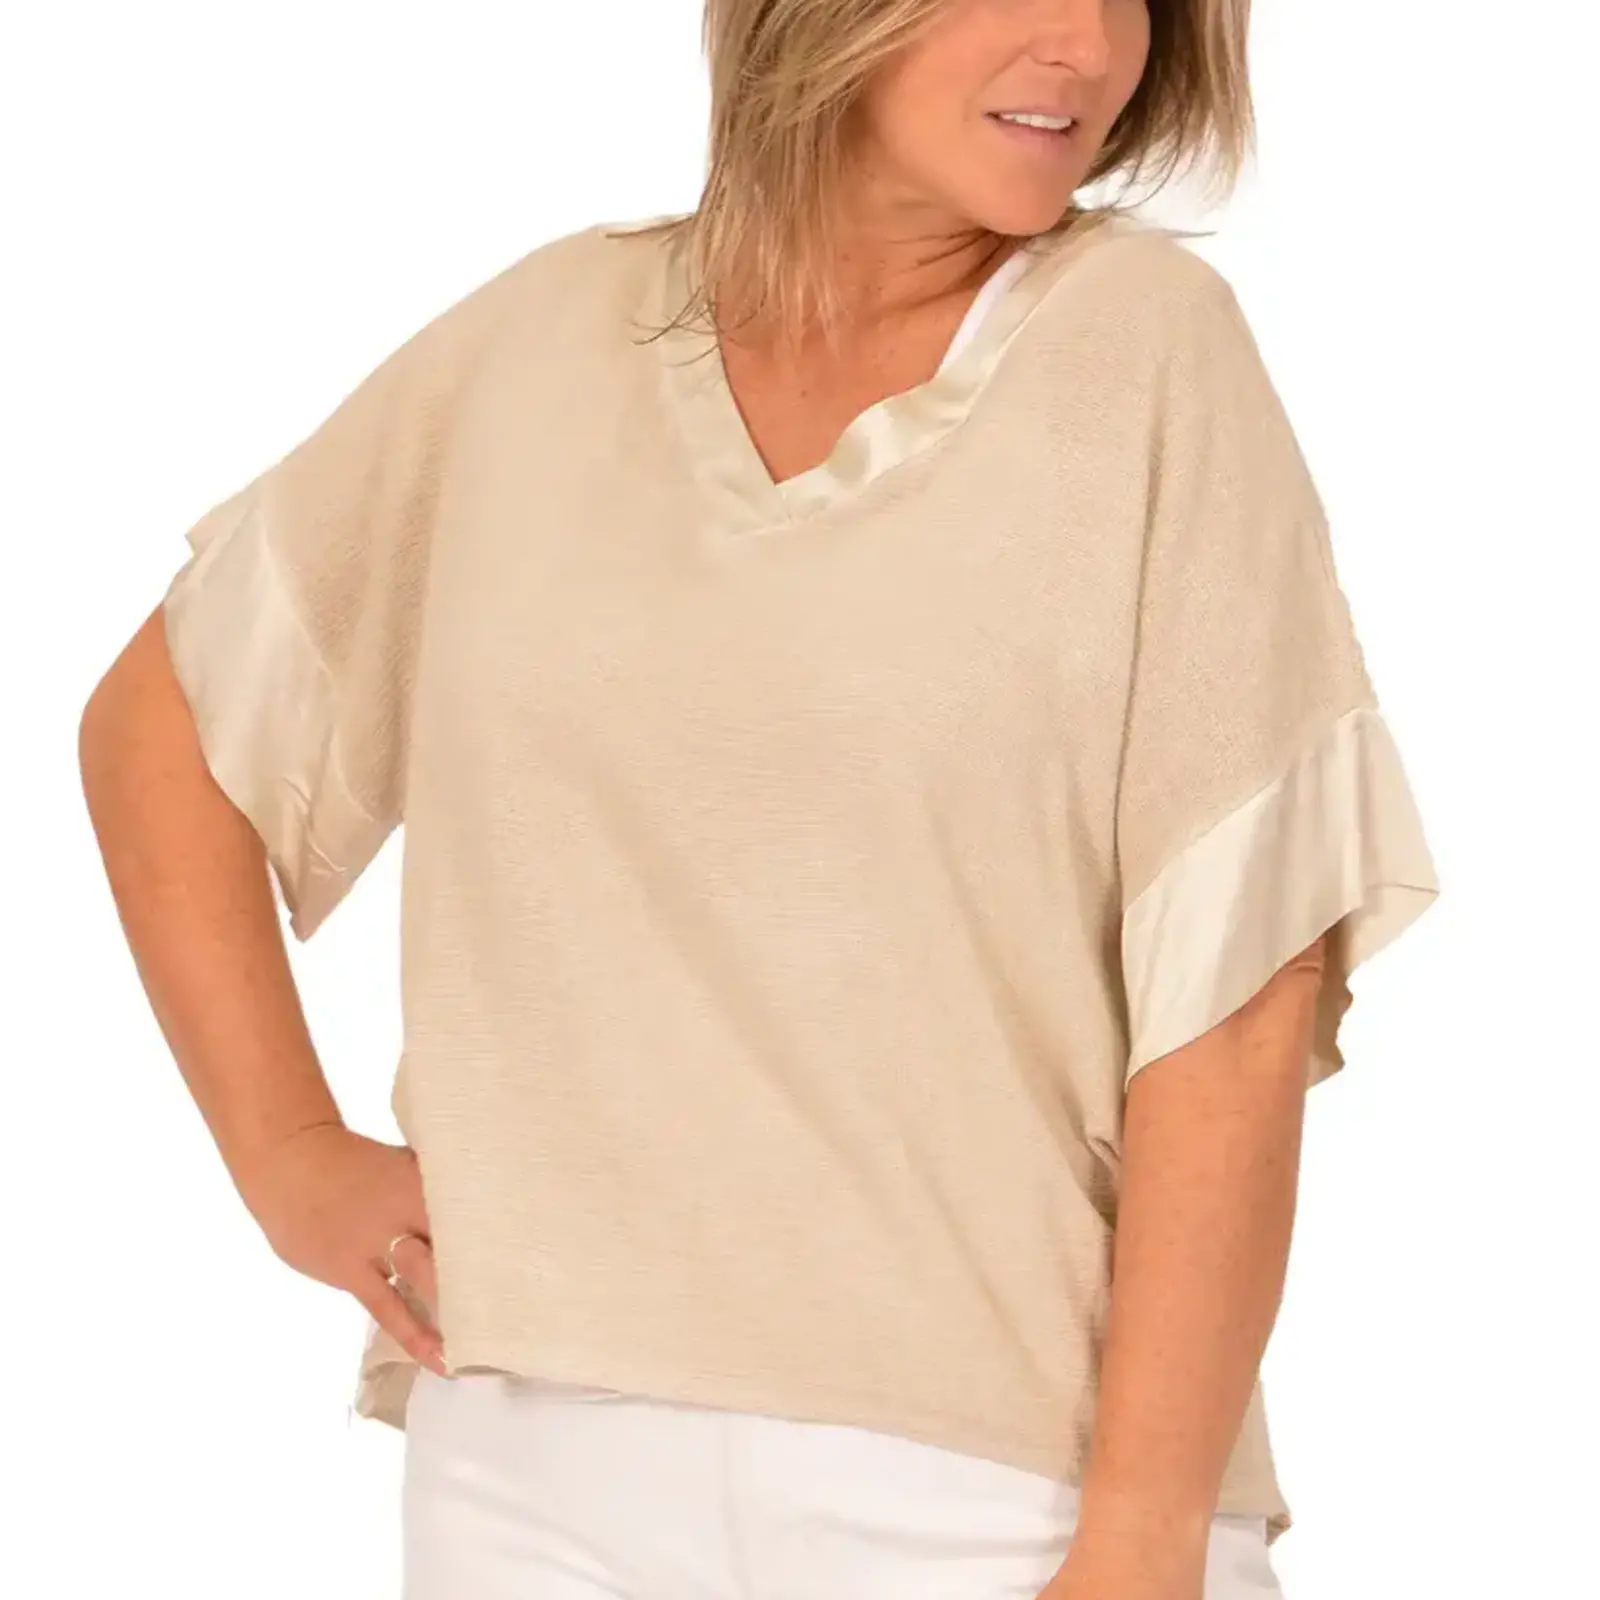 Catherine Lillywhite's Beige Satin Edge Tee  Made in Italy  ITEL809903BE loading=